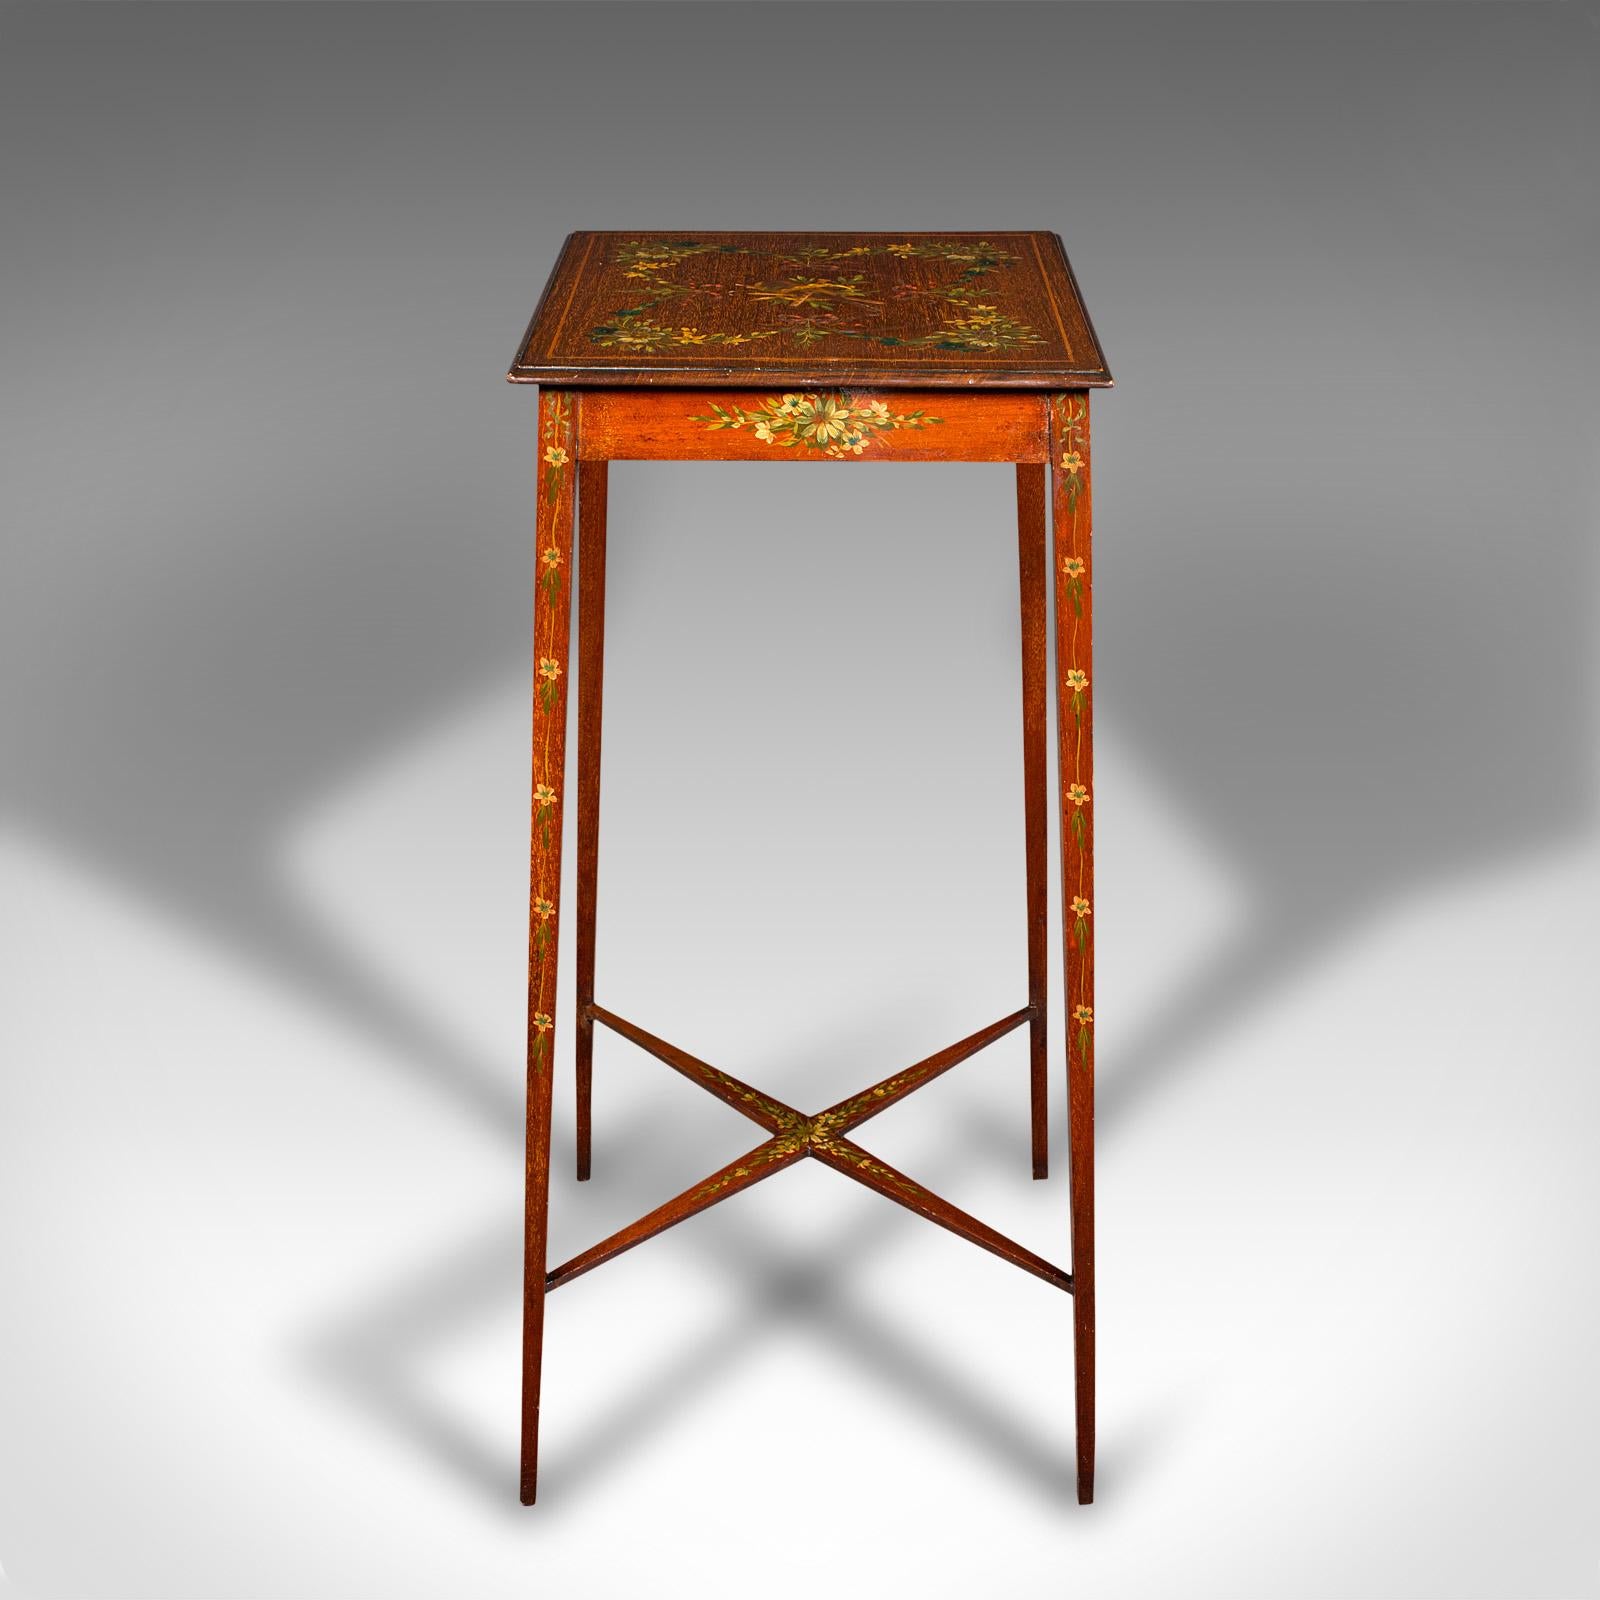 Small Antique Lamp Table, English, Occasional, Hand Painted Decor, Regency, 1820 In Good Condition For Sale In Hele, Devon, GB